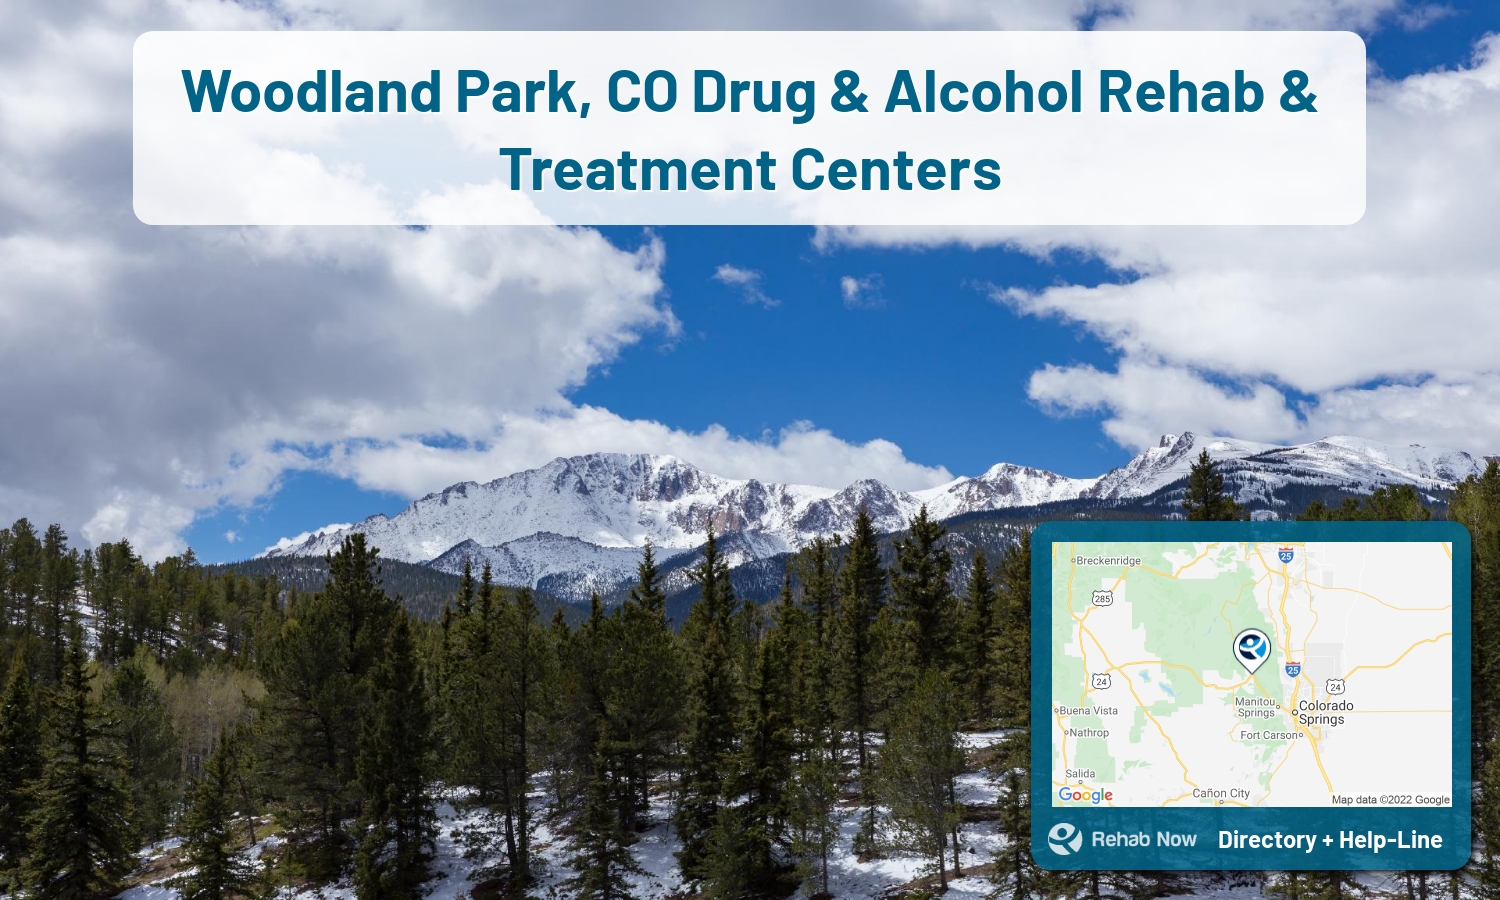 View options, availability, treatment methods, and more, for drug rehab and alcohol treatment in Woodland Park, Colorado